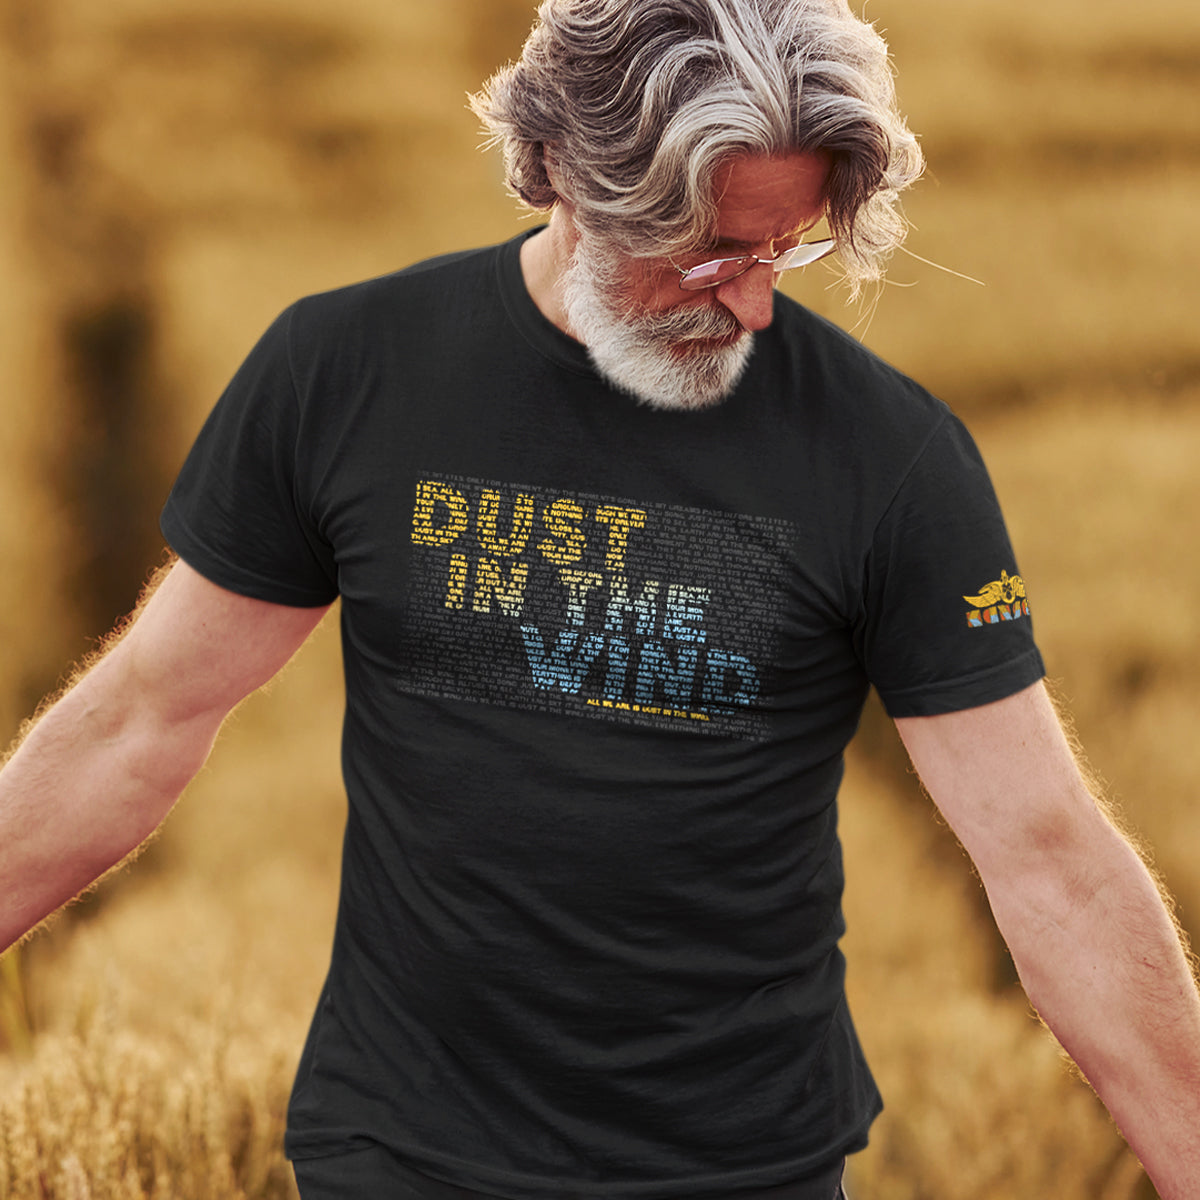 A male model wearing a black t-shirt standing in a wheat field. On the front of the shirt is text saying "dust in the wind." The text is comprised of smaller text, colored yellow and blue, to form the dust in the wind phrase. On the left sleeve is the logo of the band Kansas.